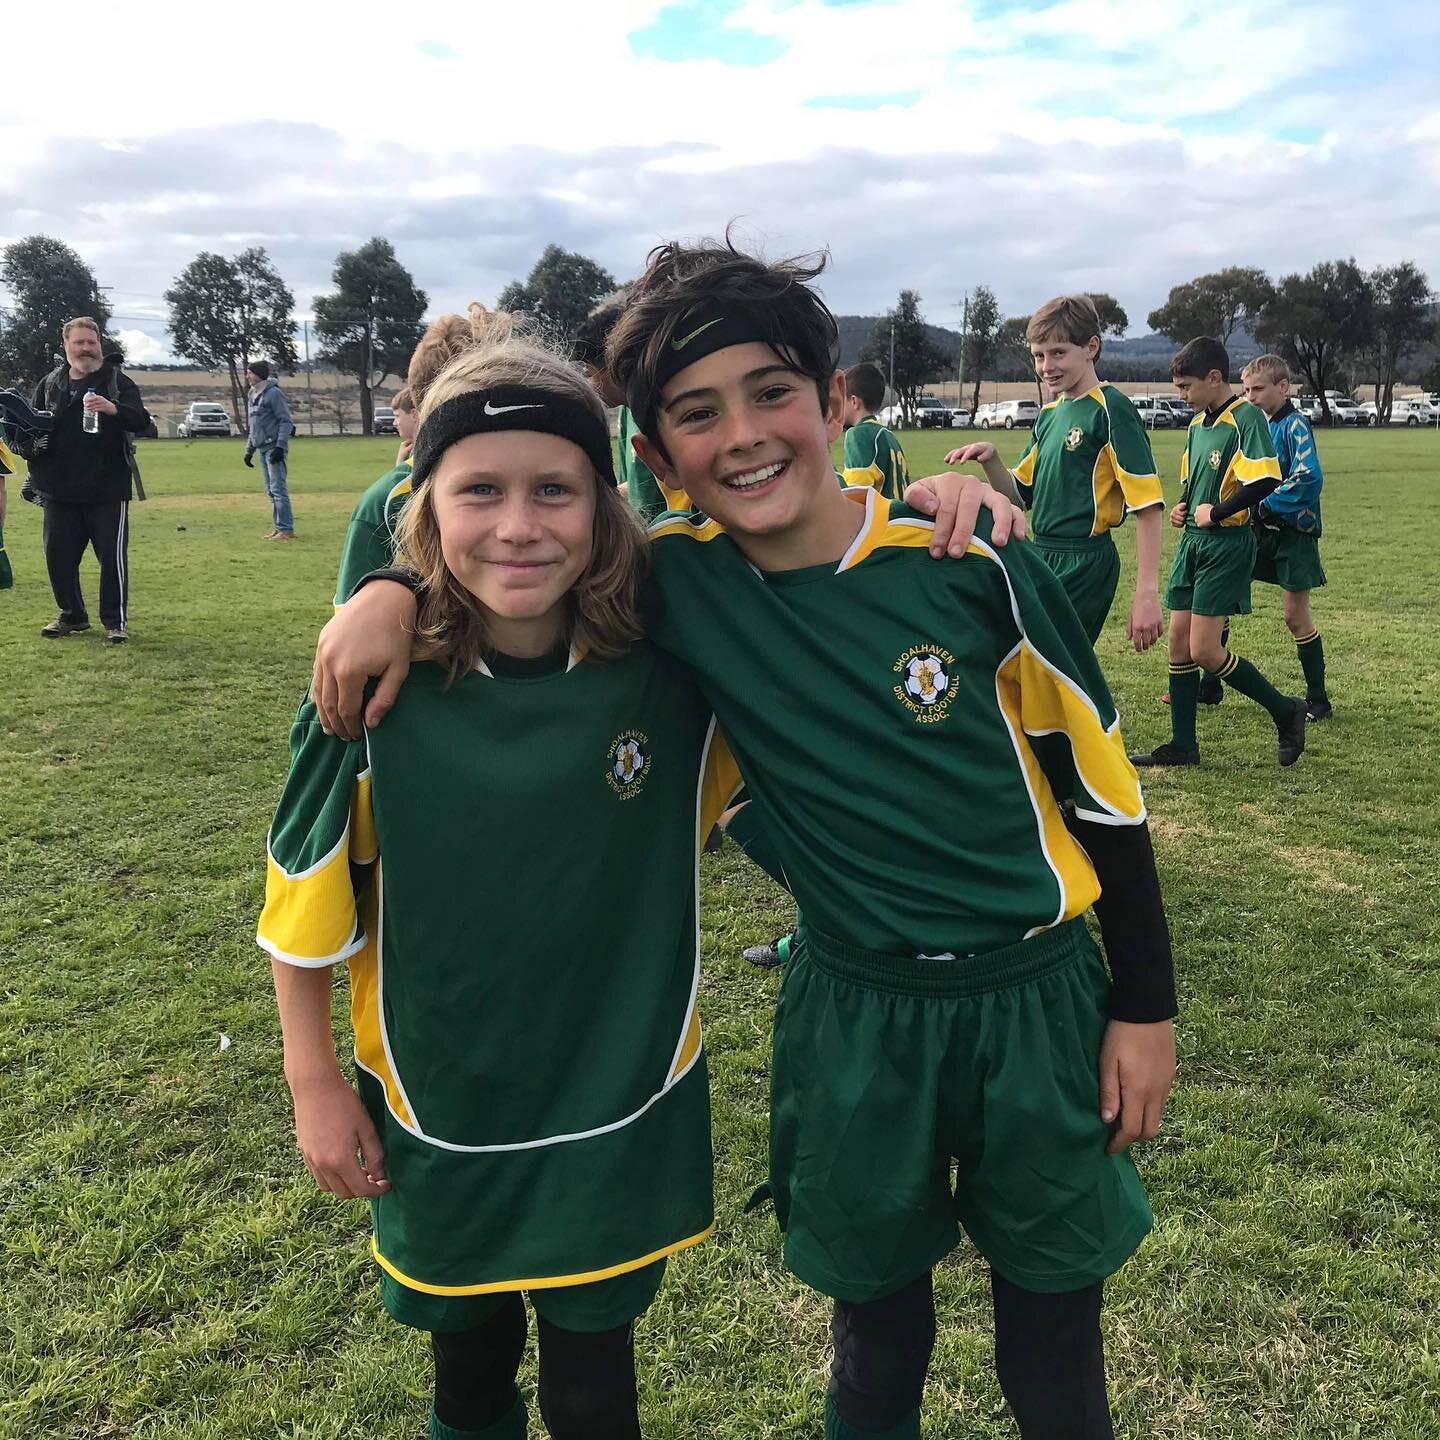 Can&rsquo;t let the girls have all the fun! Congratulations to Bede and Archie who played in the U12s Shoalhaven Rep side who also were Branch Champions! The smiles on their faces says it all! Well done boys, incredible work! ⚽️